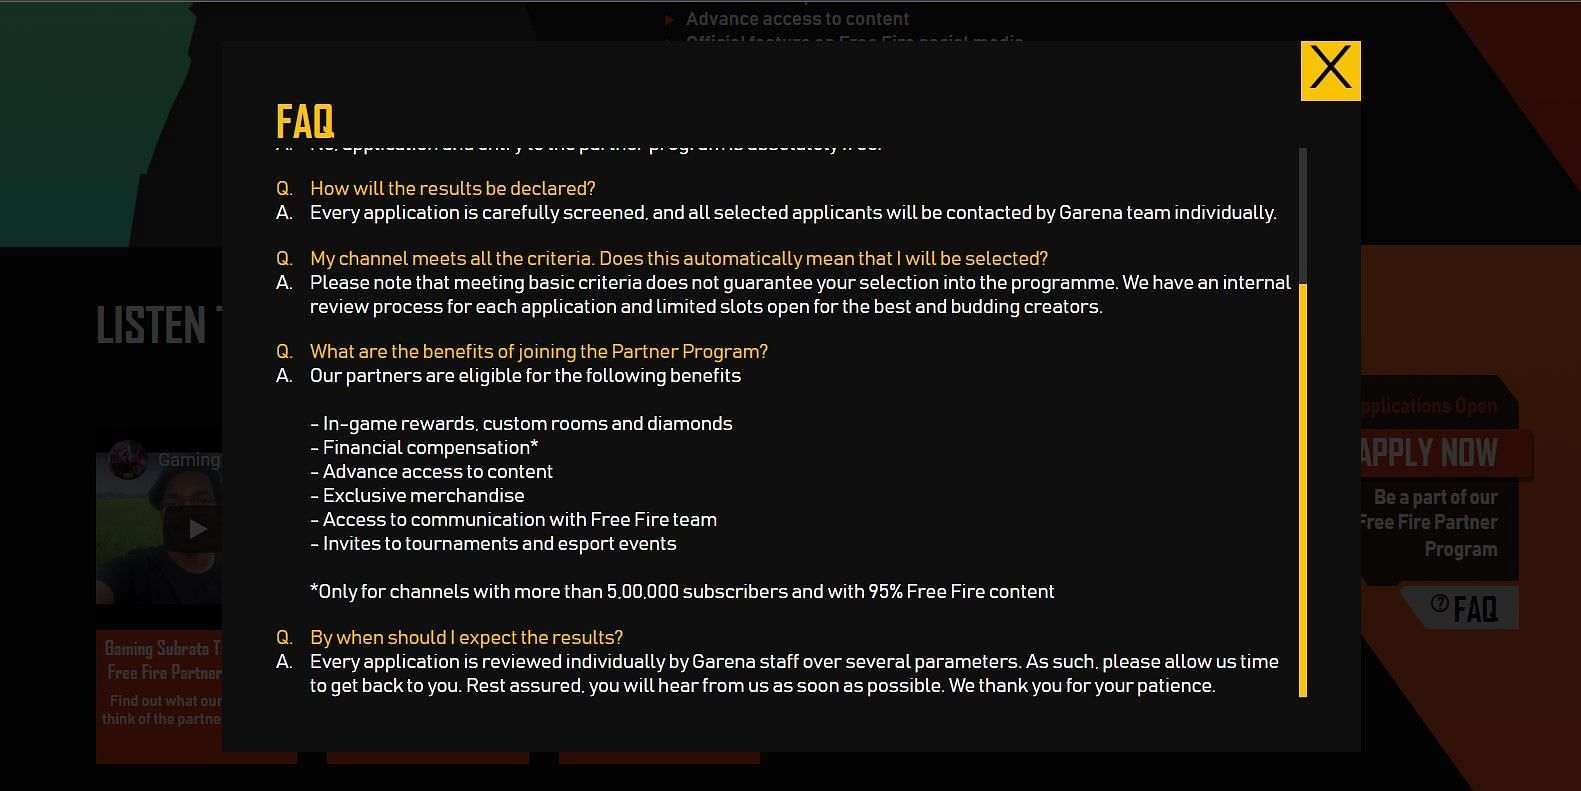 Some FAQs mentioned on the official web page (Image via Garena)